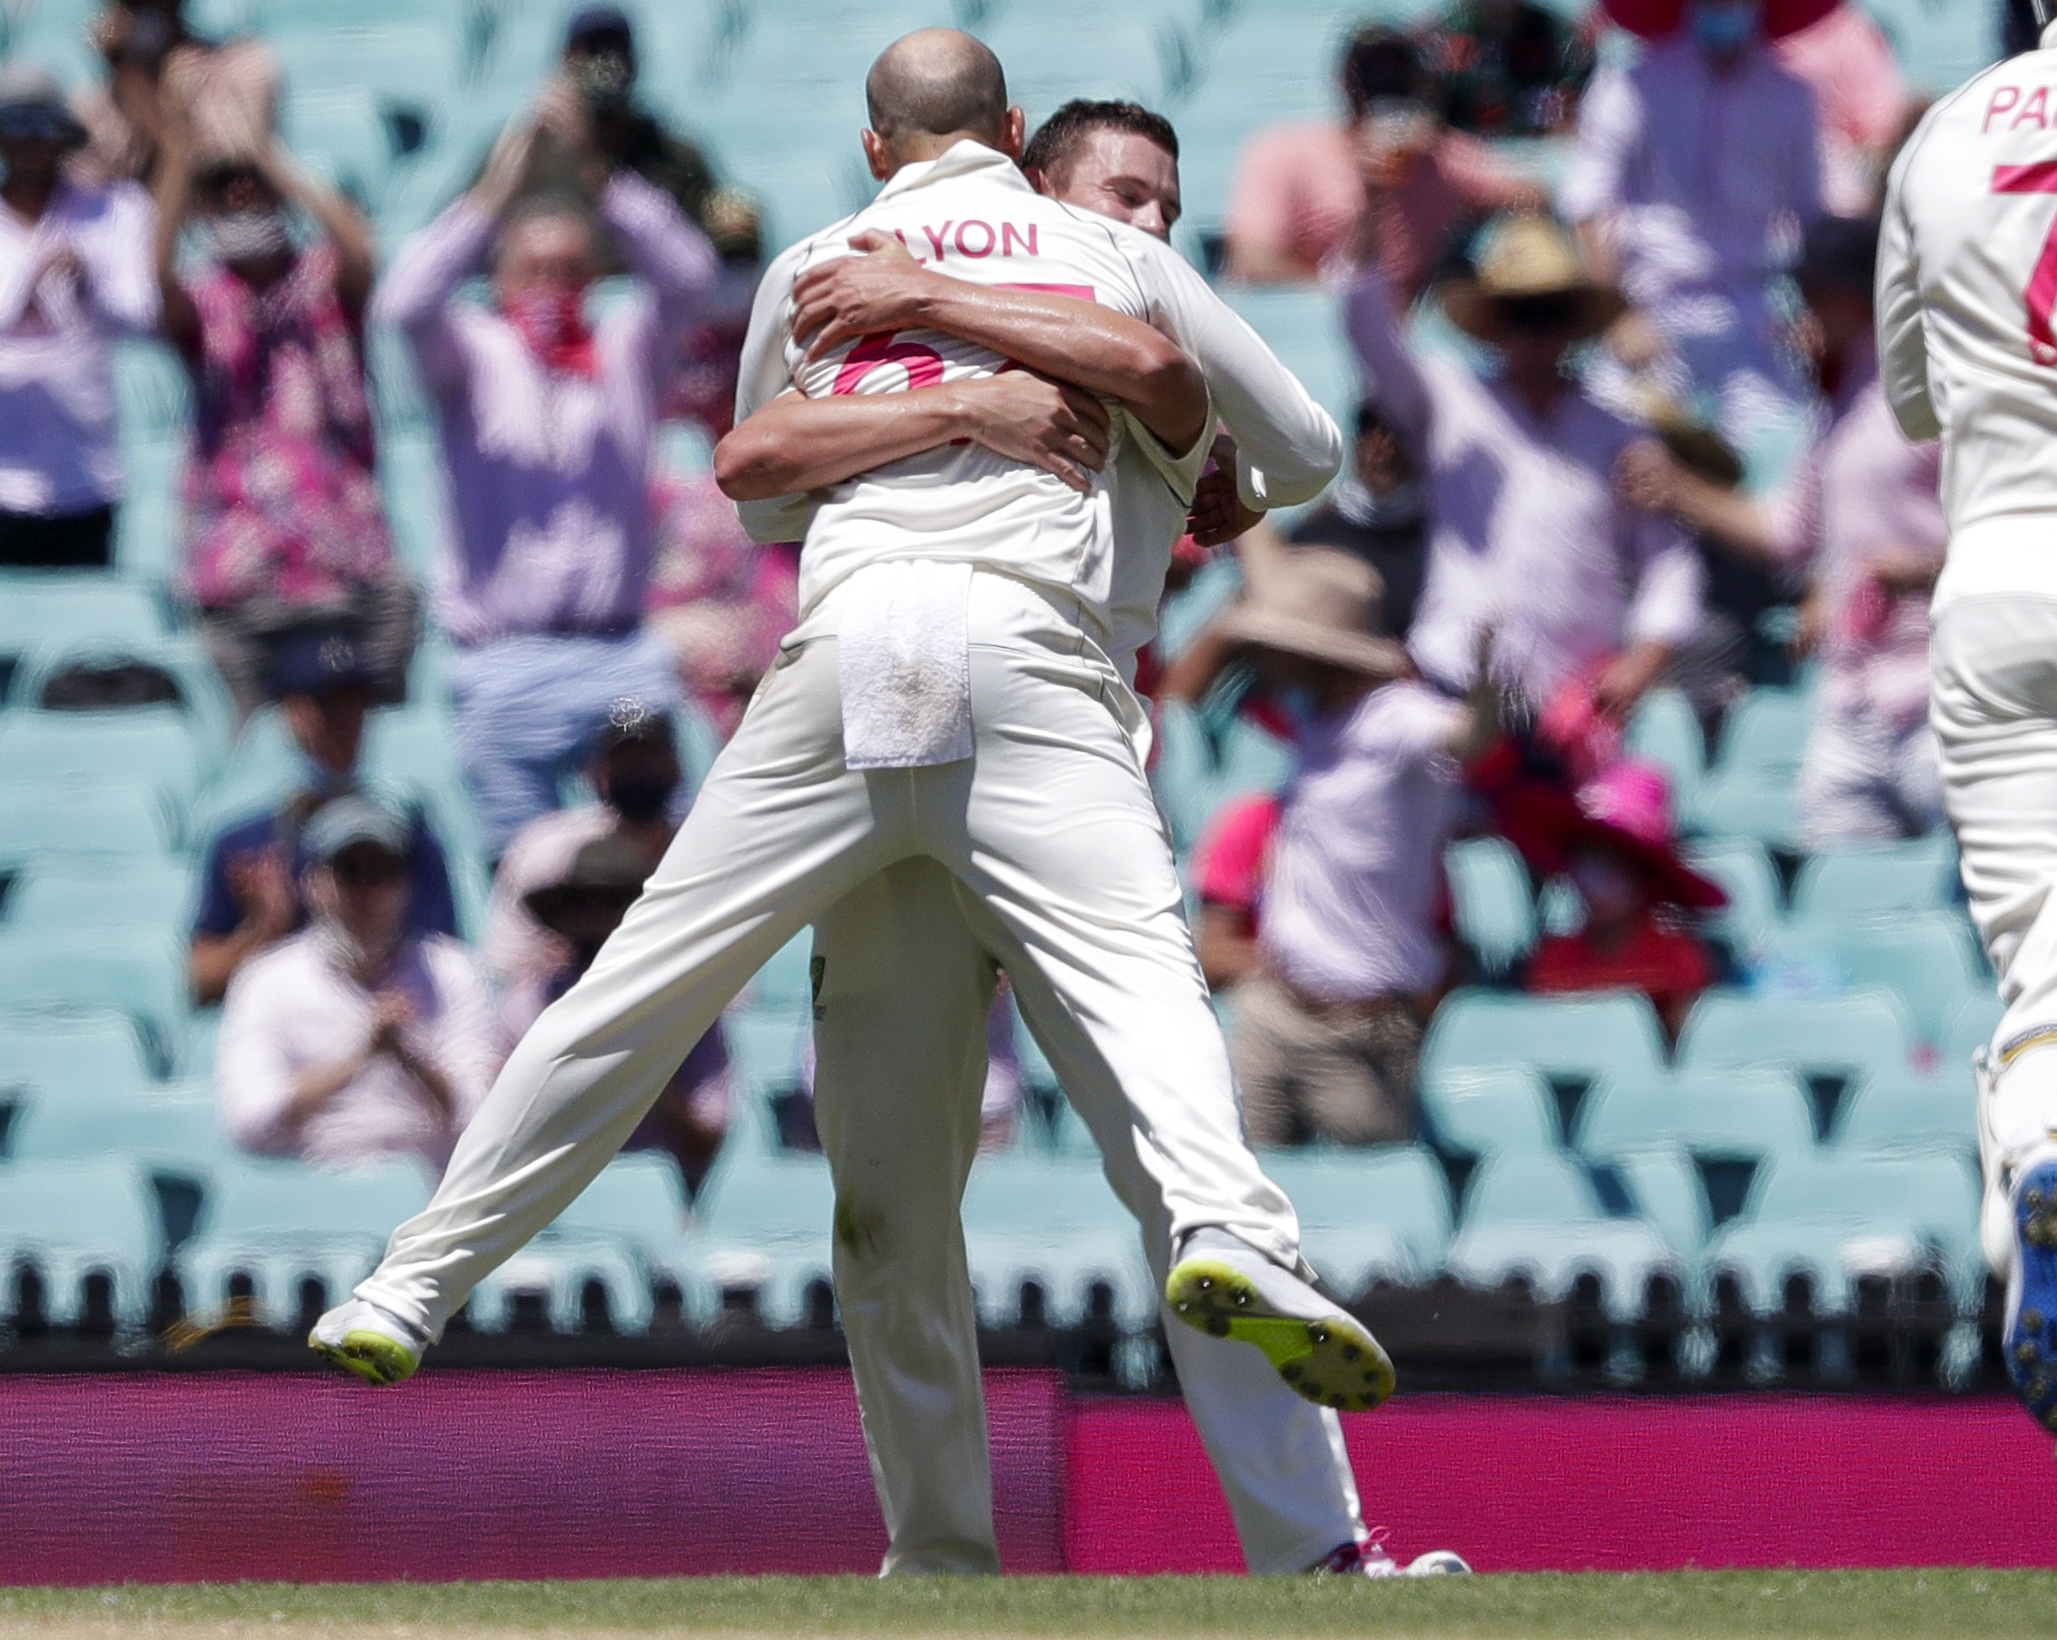 Australia's Josh Hazlewood, right, is congratulated by teammate Nathan Lyon after running out India's Hanuma Vihari during play on day three of the third cricket test between India and Australia at the Sydney Cricket Ground, Sydney, Australia, Saturday, Jan. 9, 2021. Photo: AP